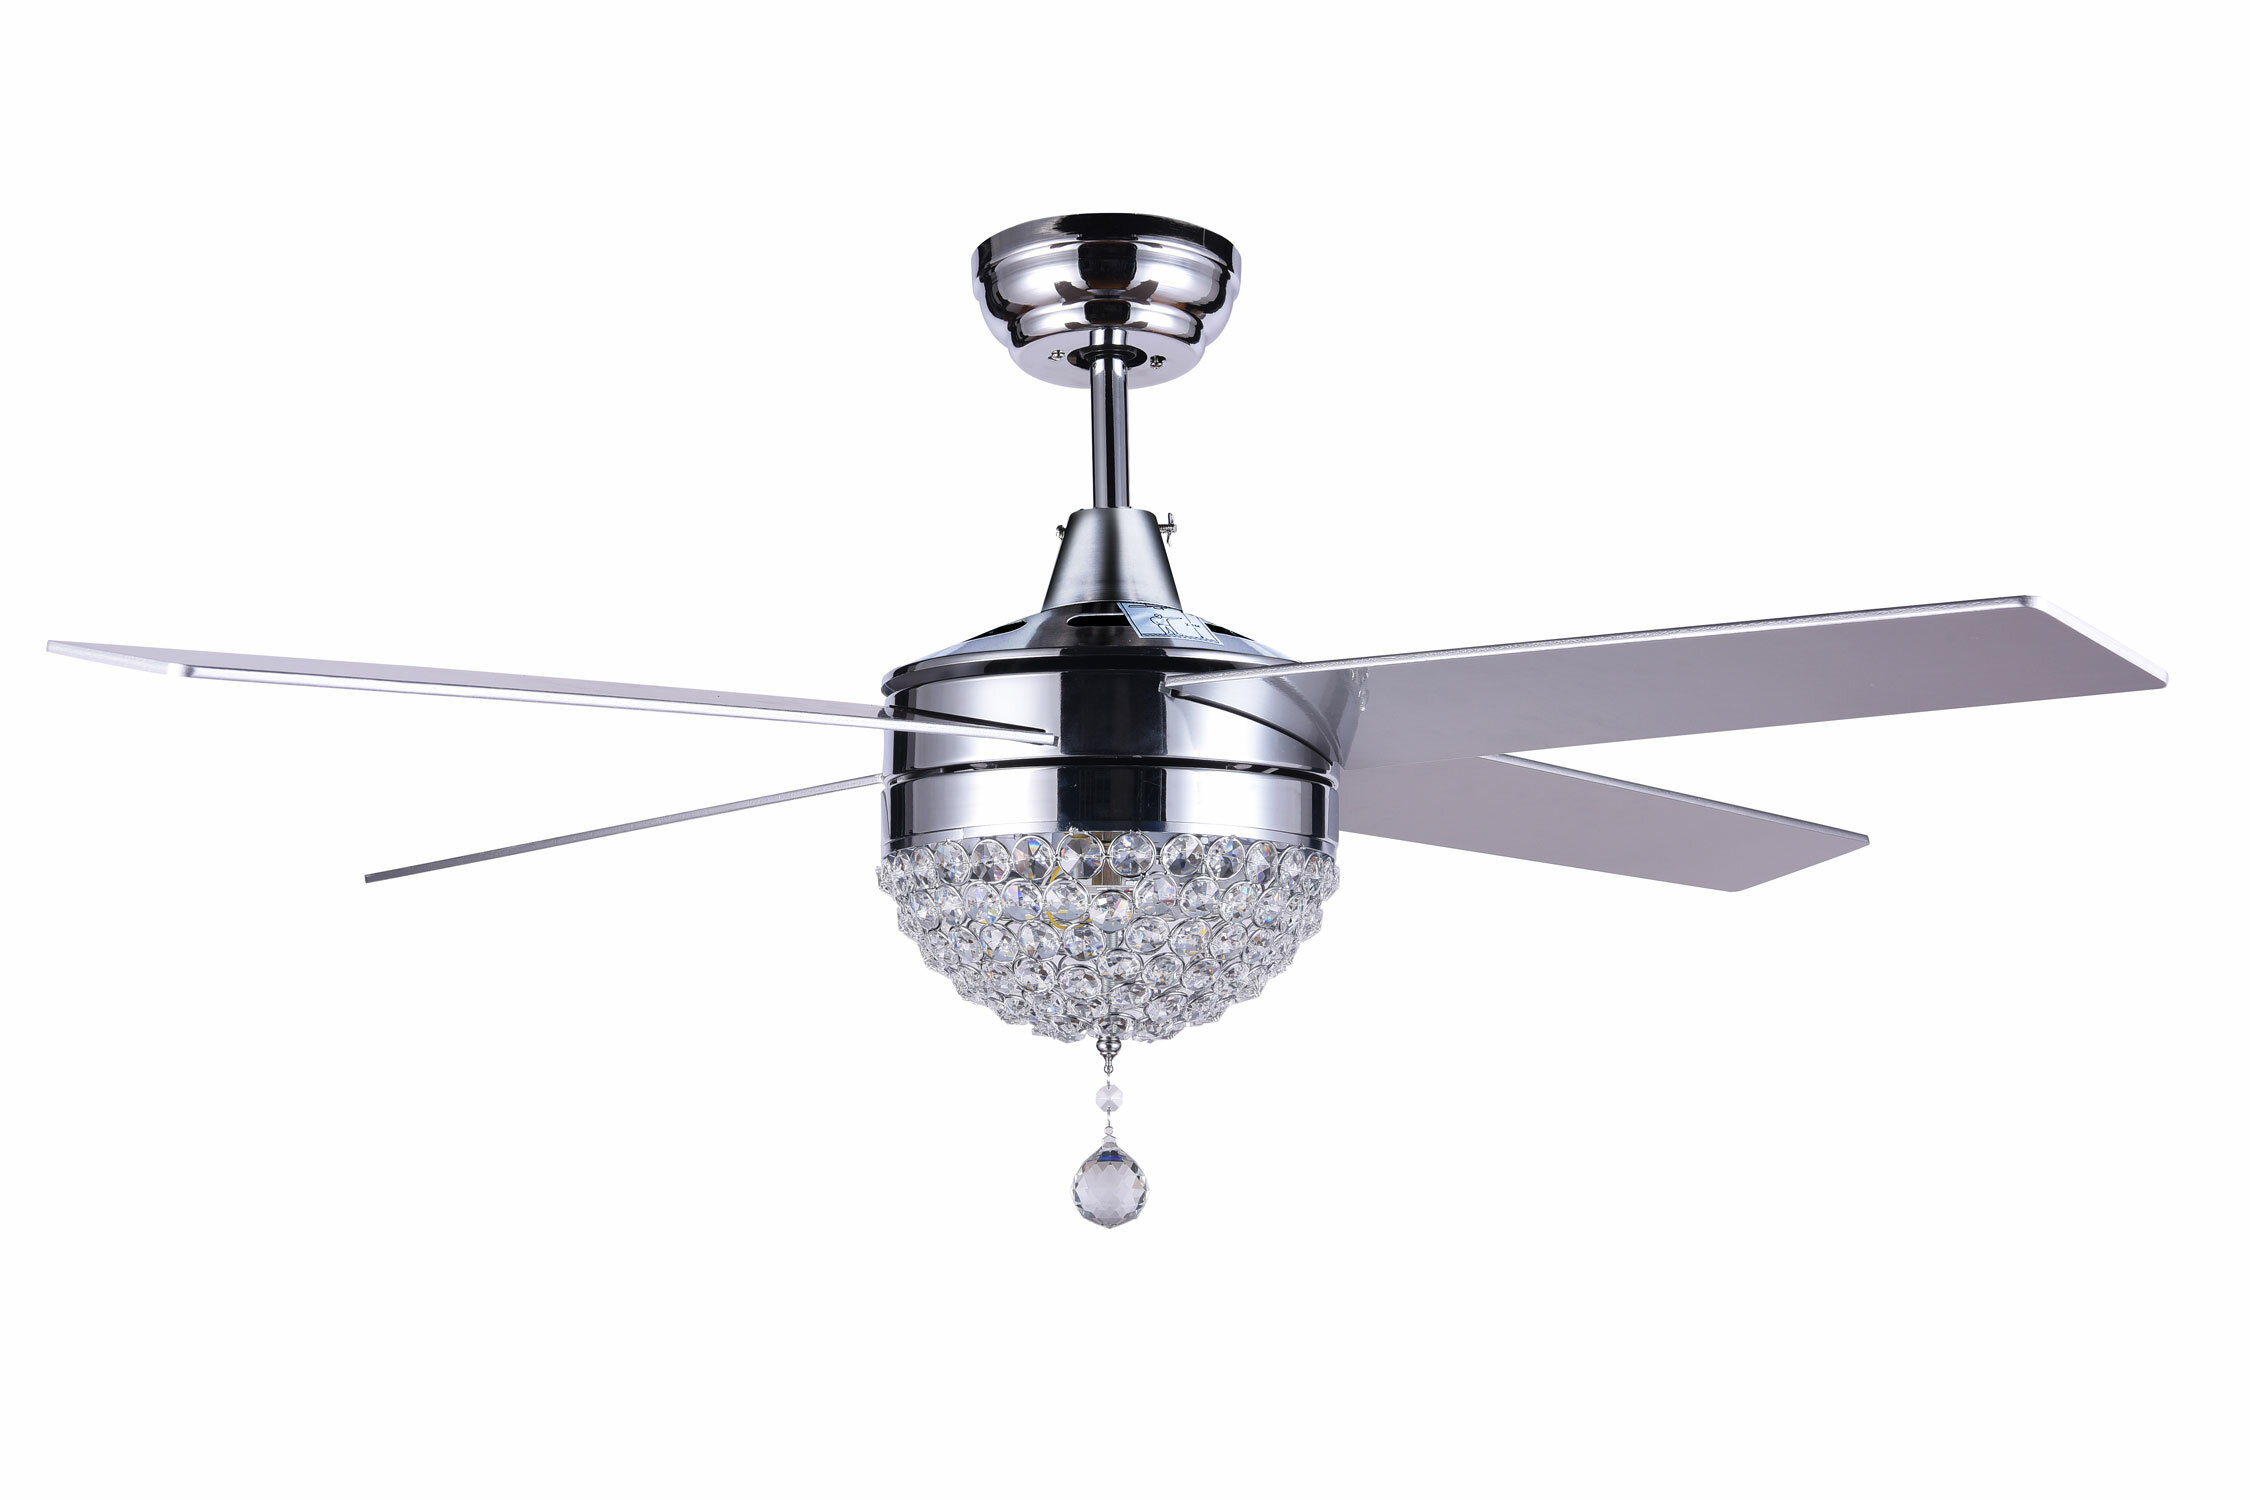 House Of Hampton Taja 4 Blade Led Crystal Ceiling Fan With Remote Control And Light Kit Included Wayfair